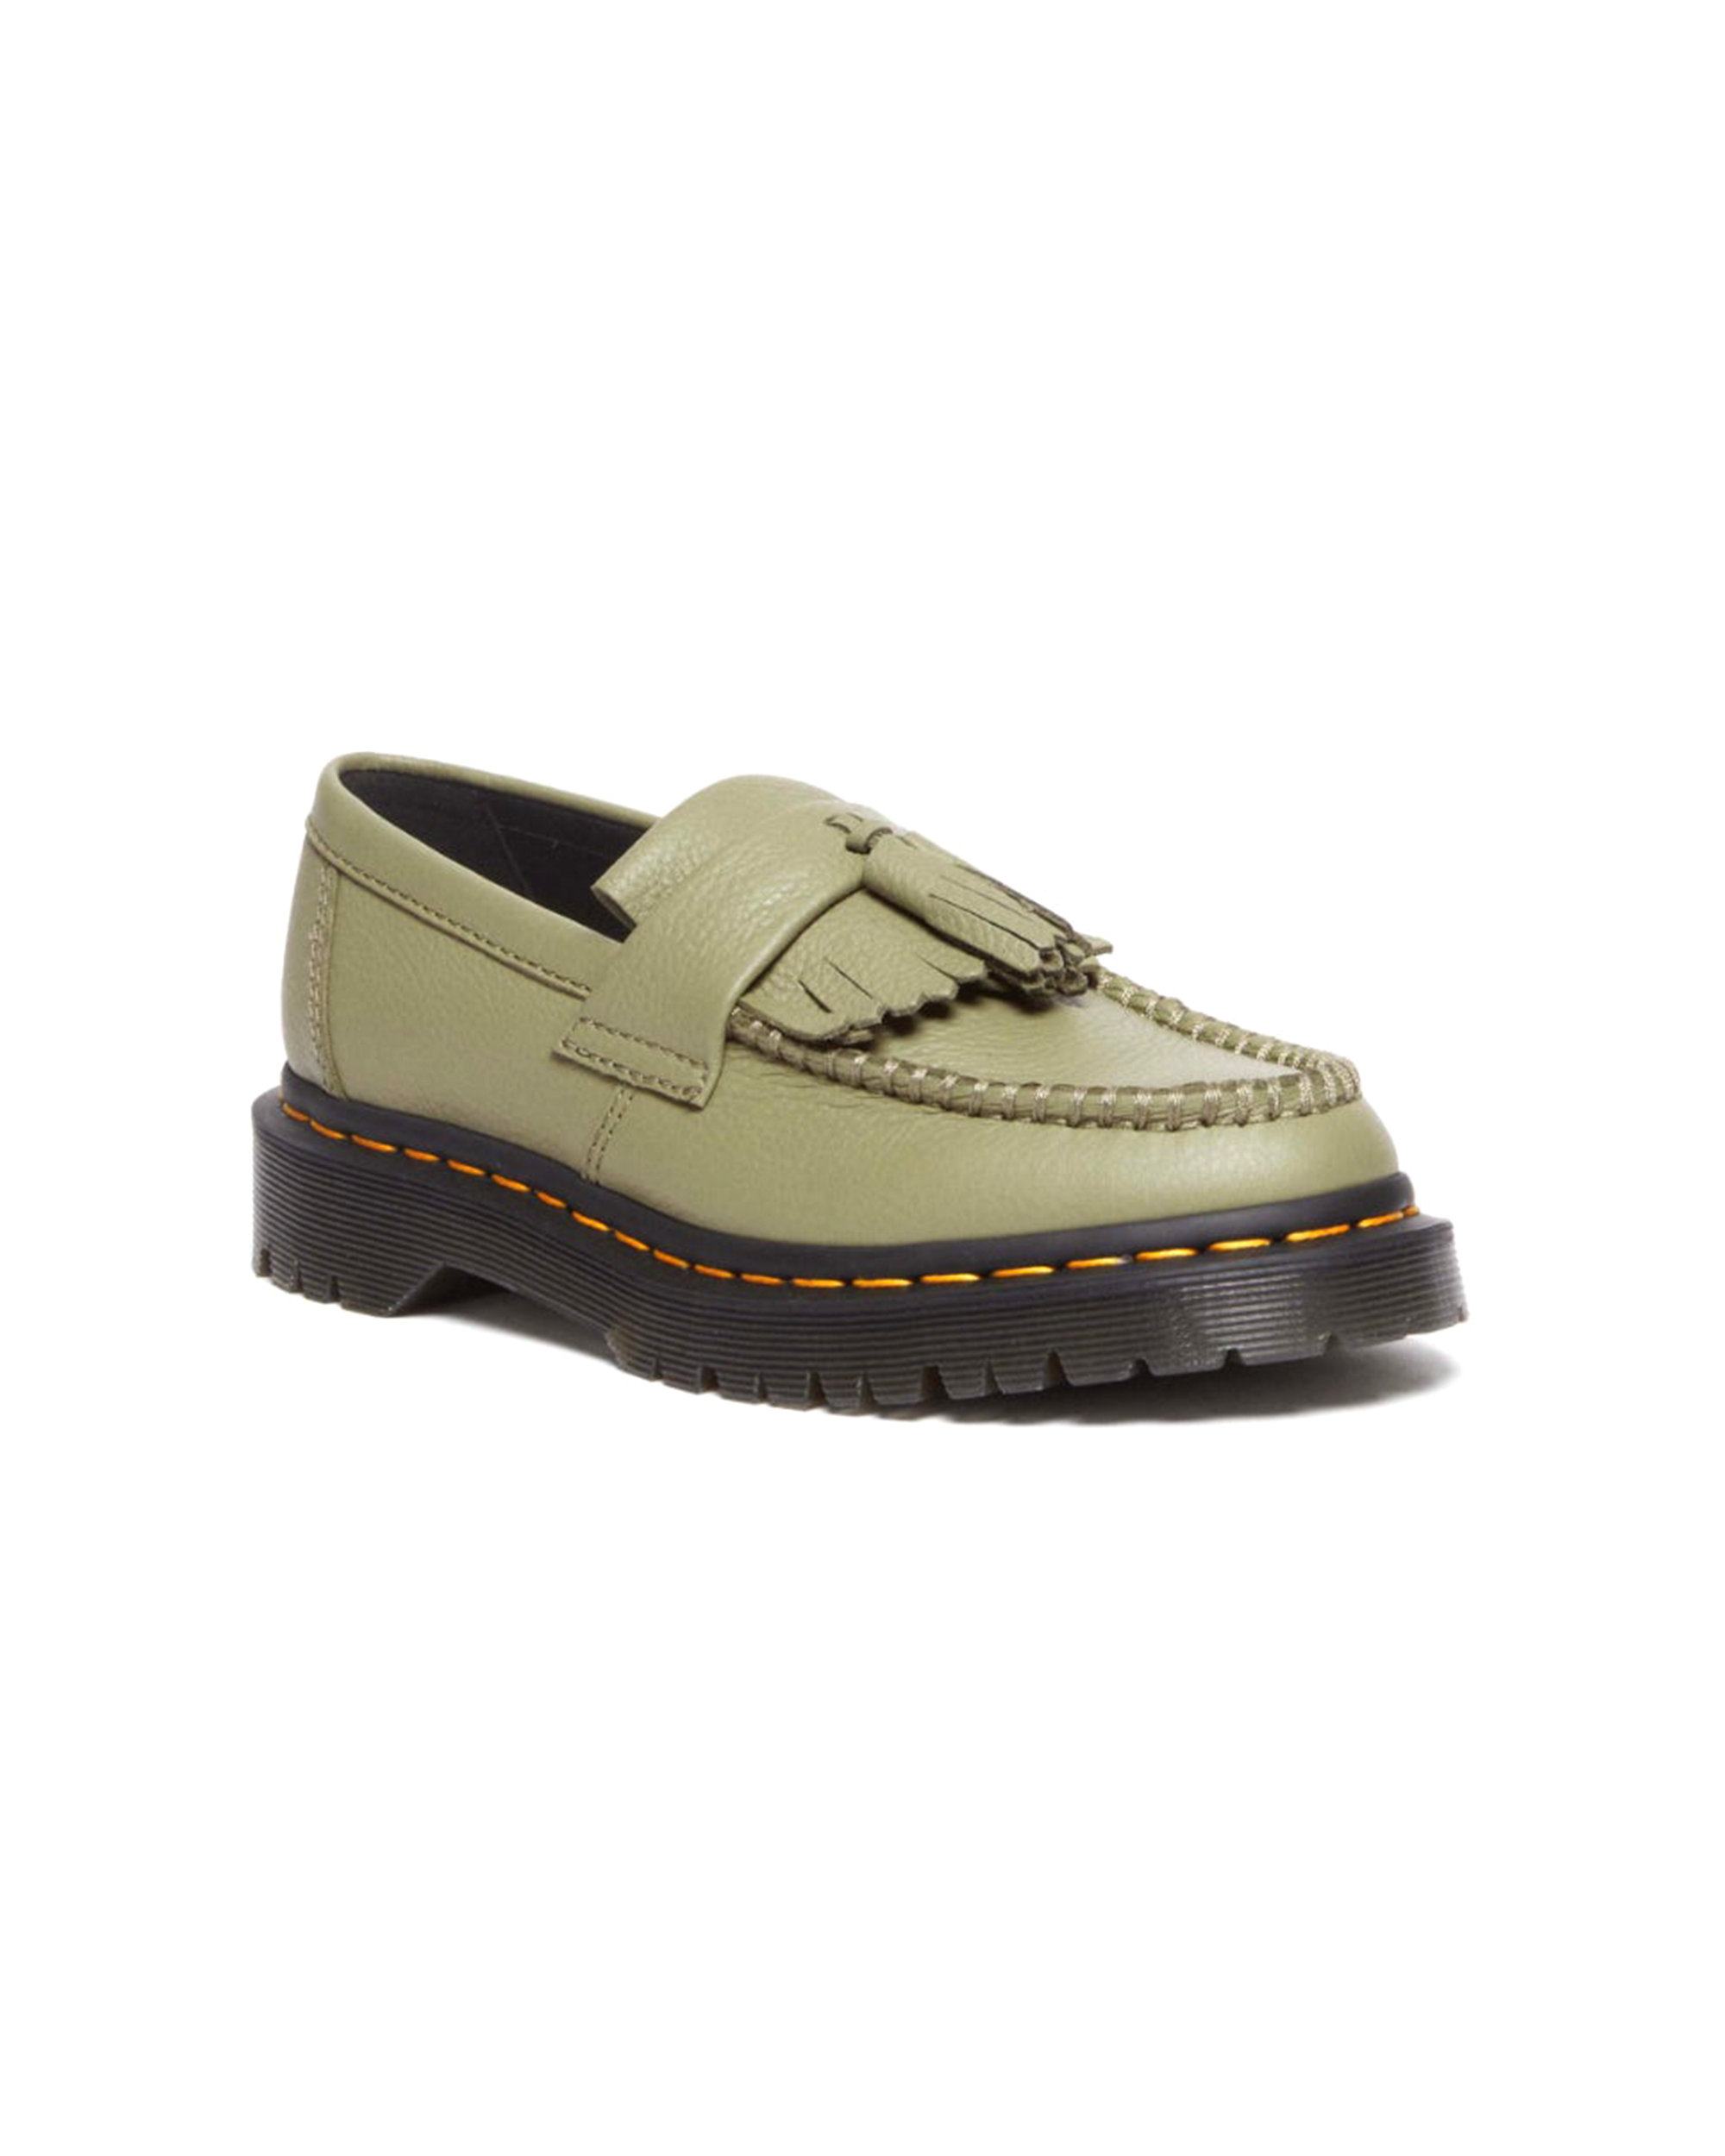 Adrian Tassel Loafer - Muted Olive